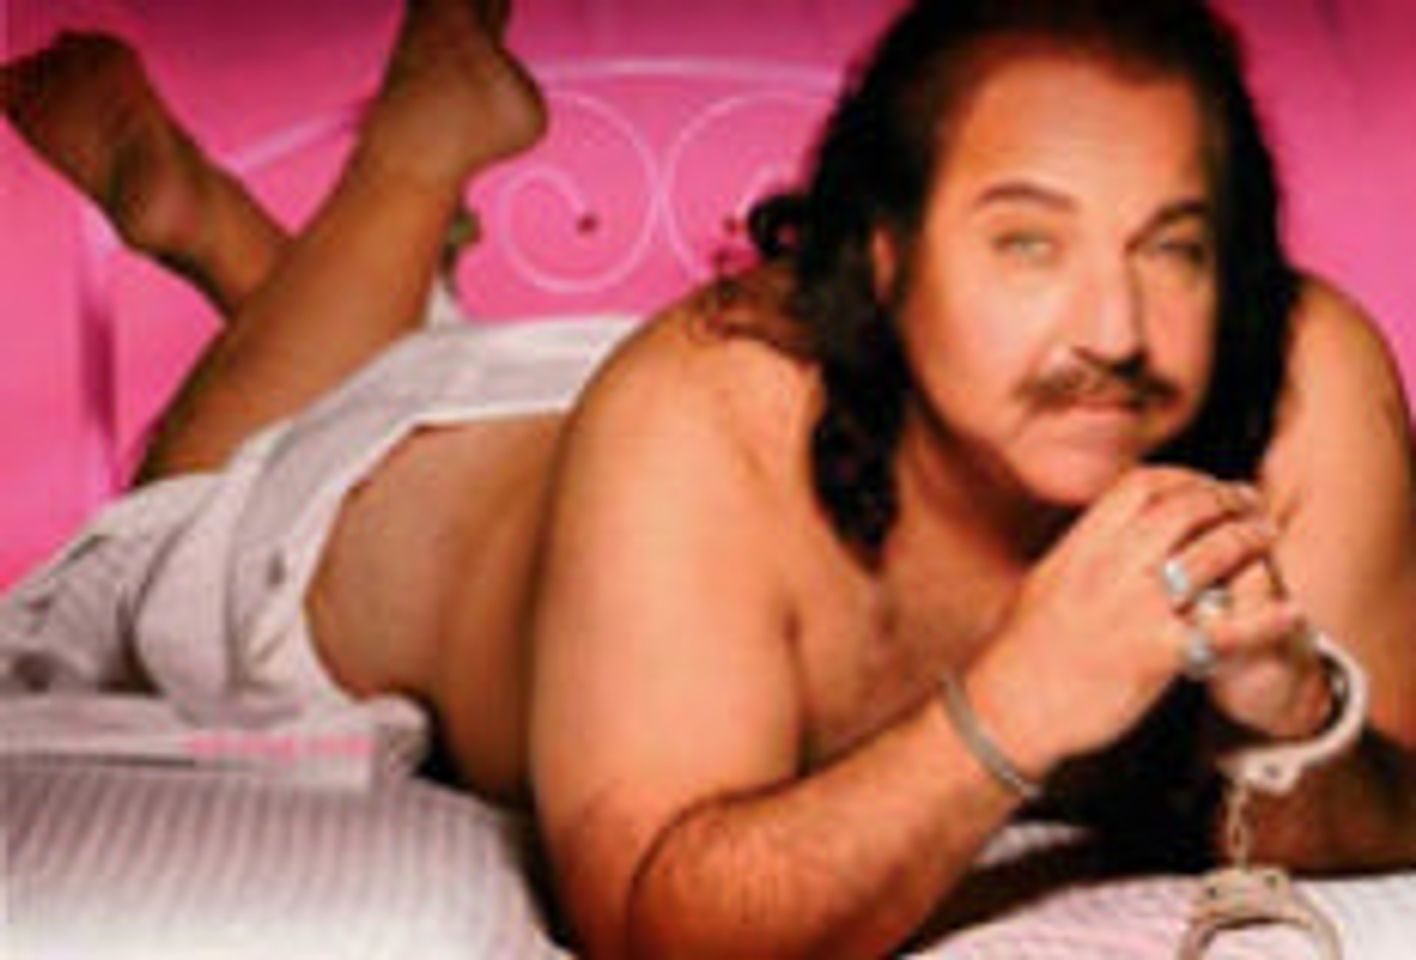 Ron Jeremy Comments on 'Dancing with the Stars'